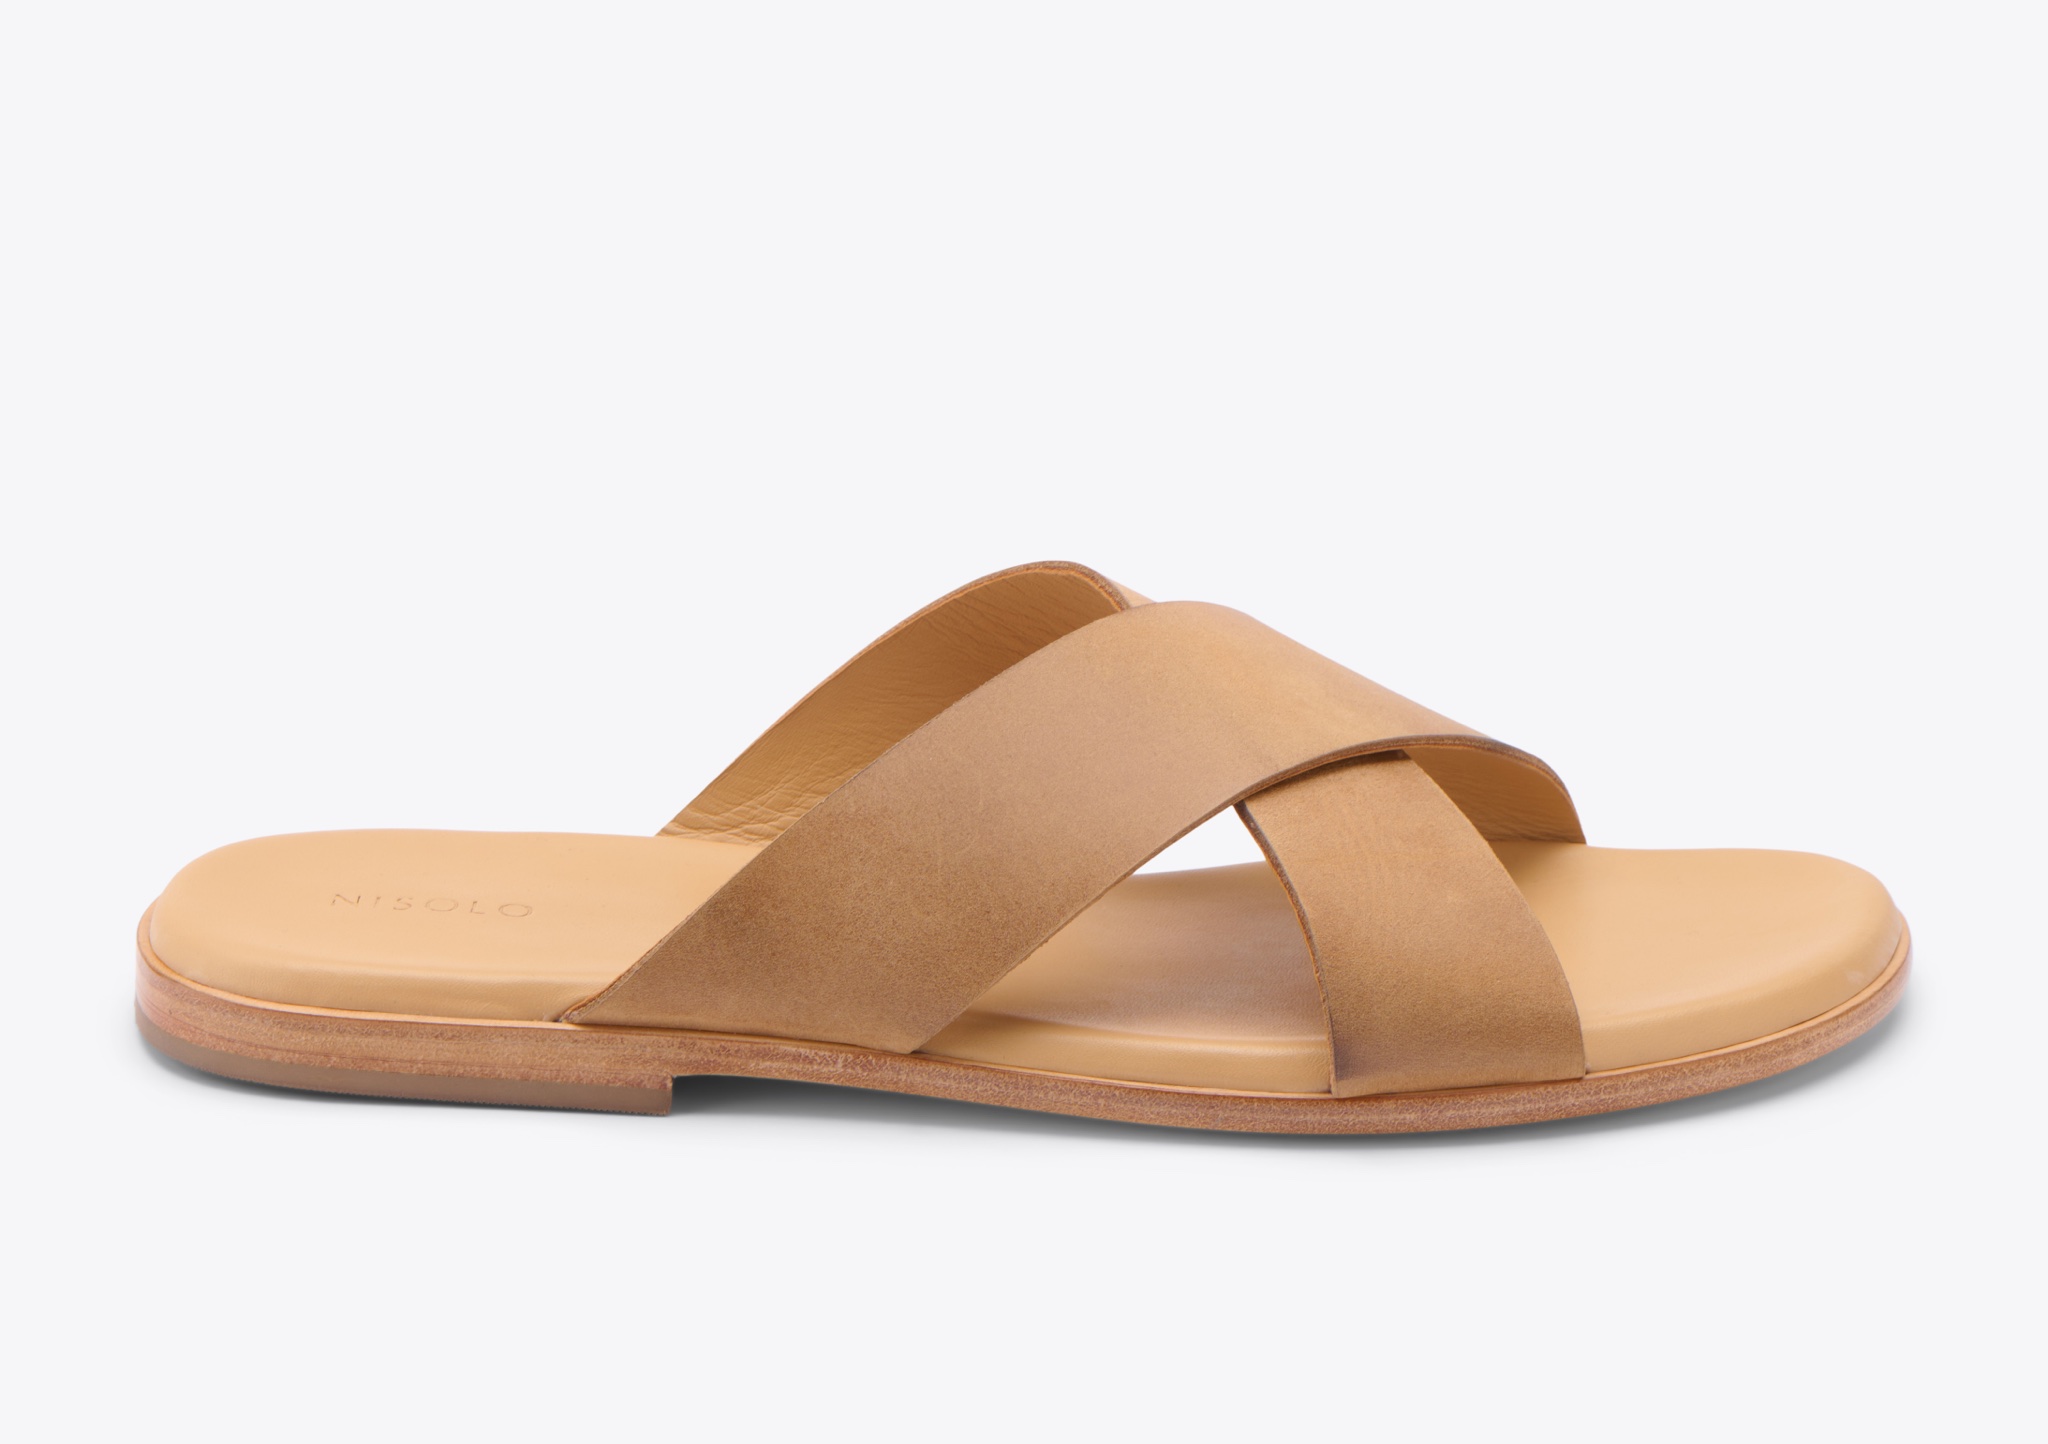 Nisolo Dante Cross Strap Sandal Tobacco - Every Nisolo product is built on the foundation of comfort, function, and design. 